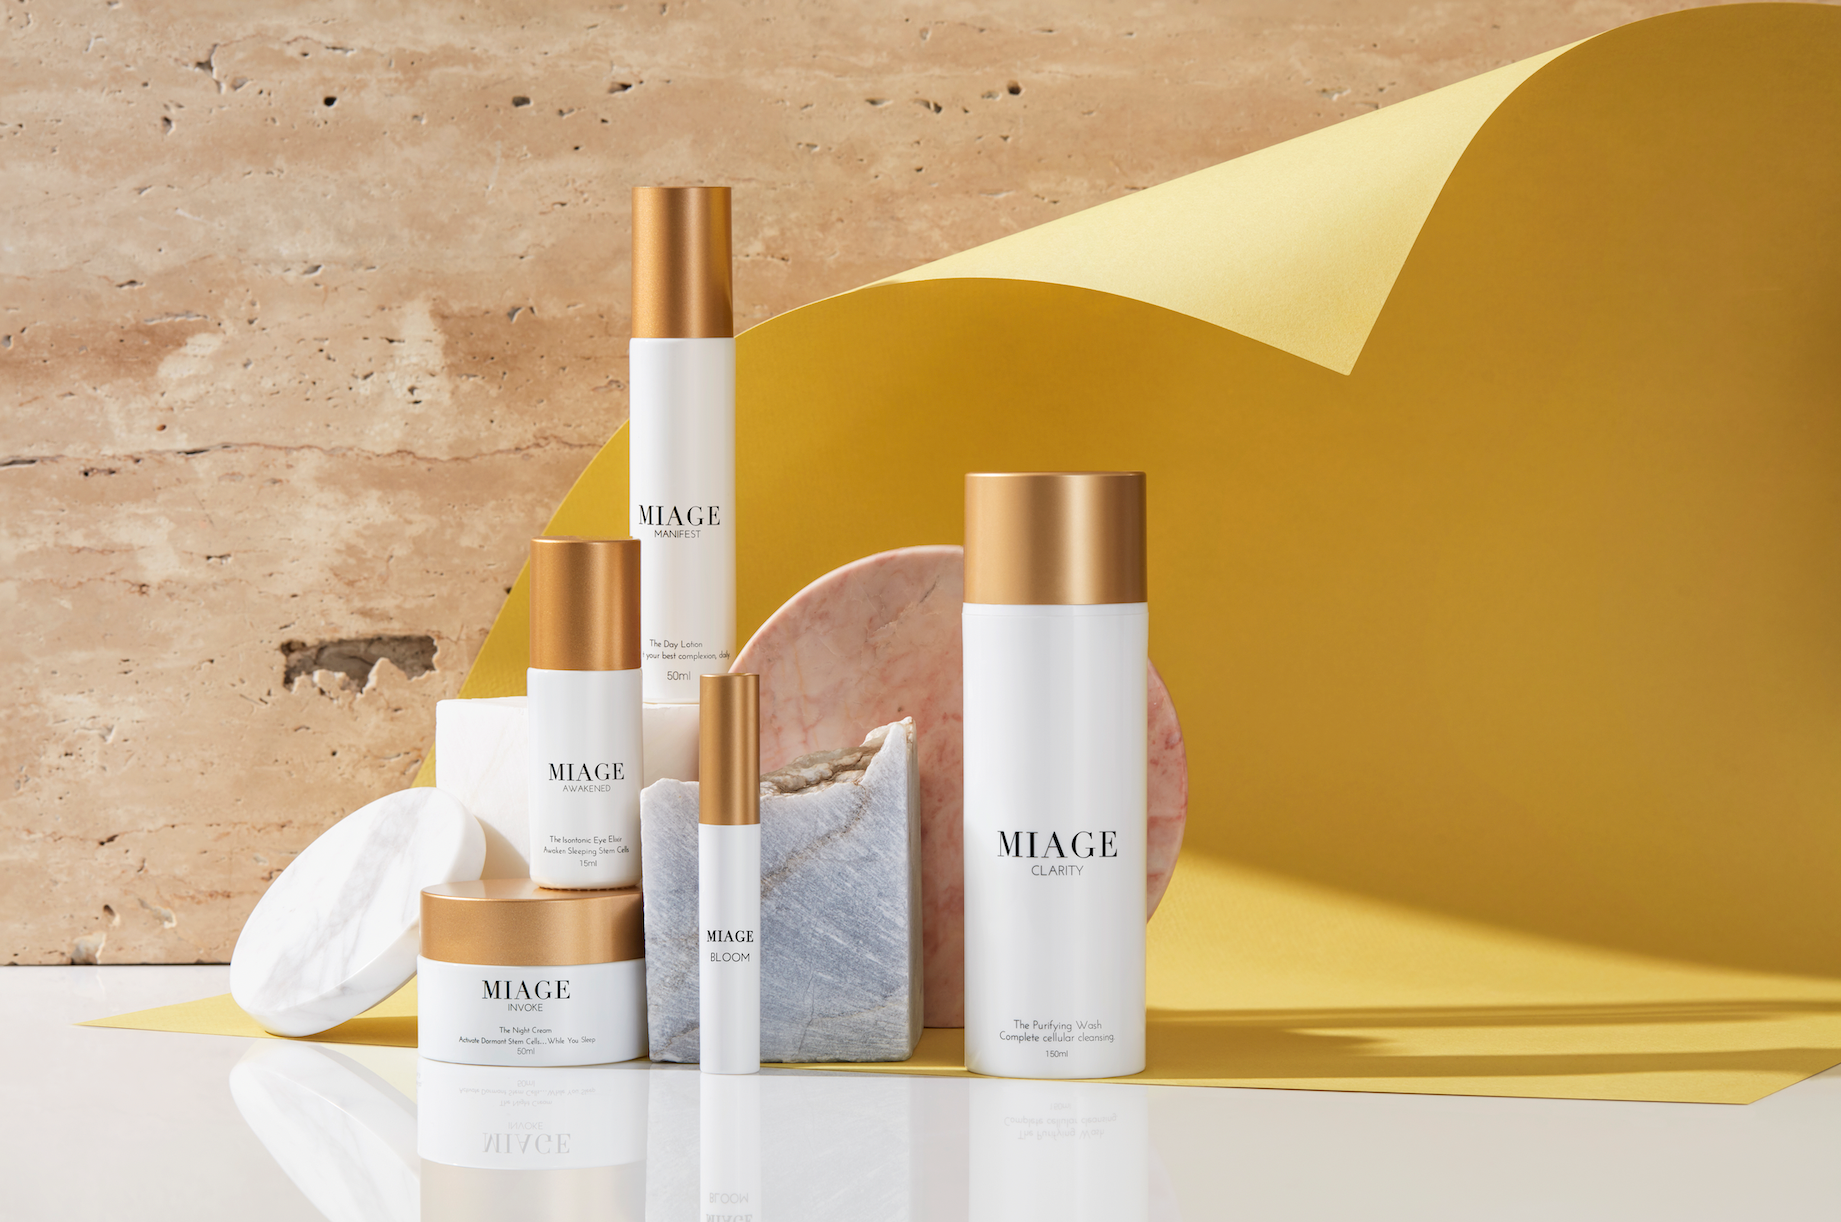 Product Review: MIAGE Skincare Line